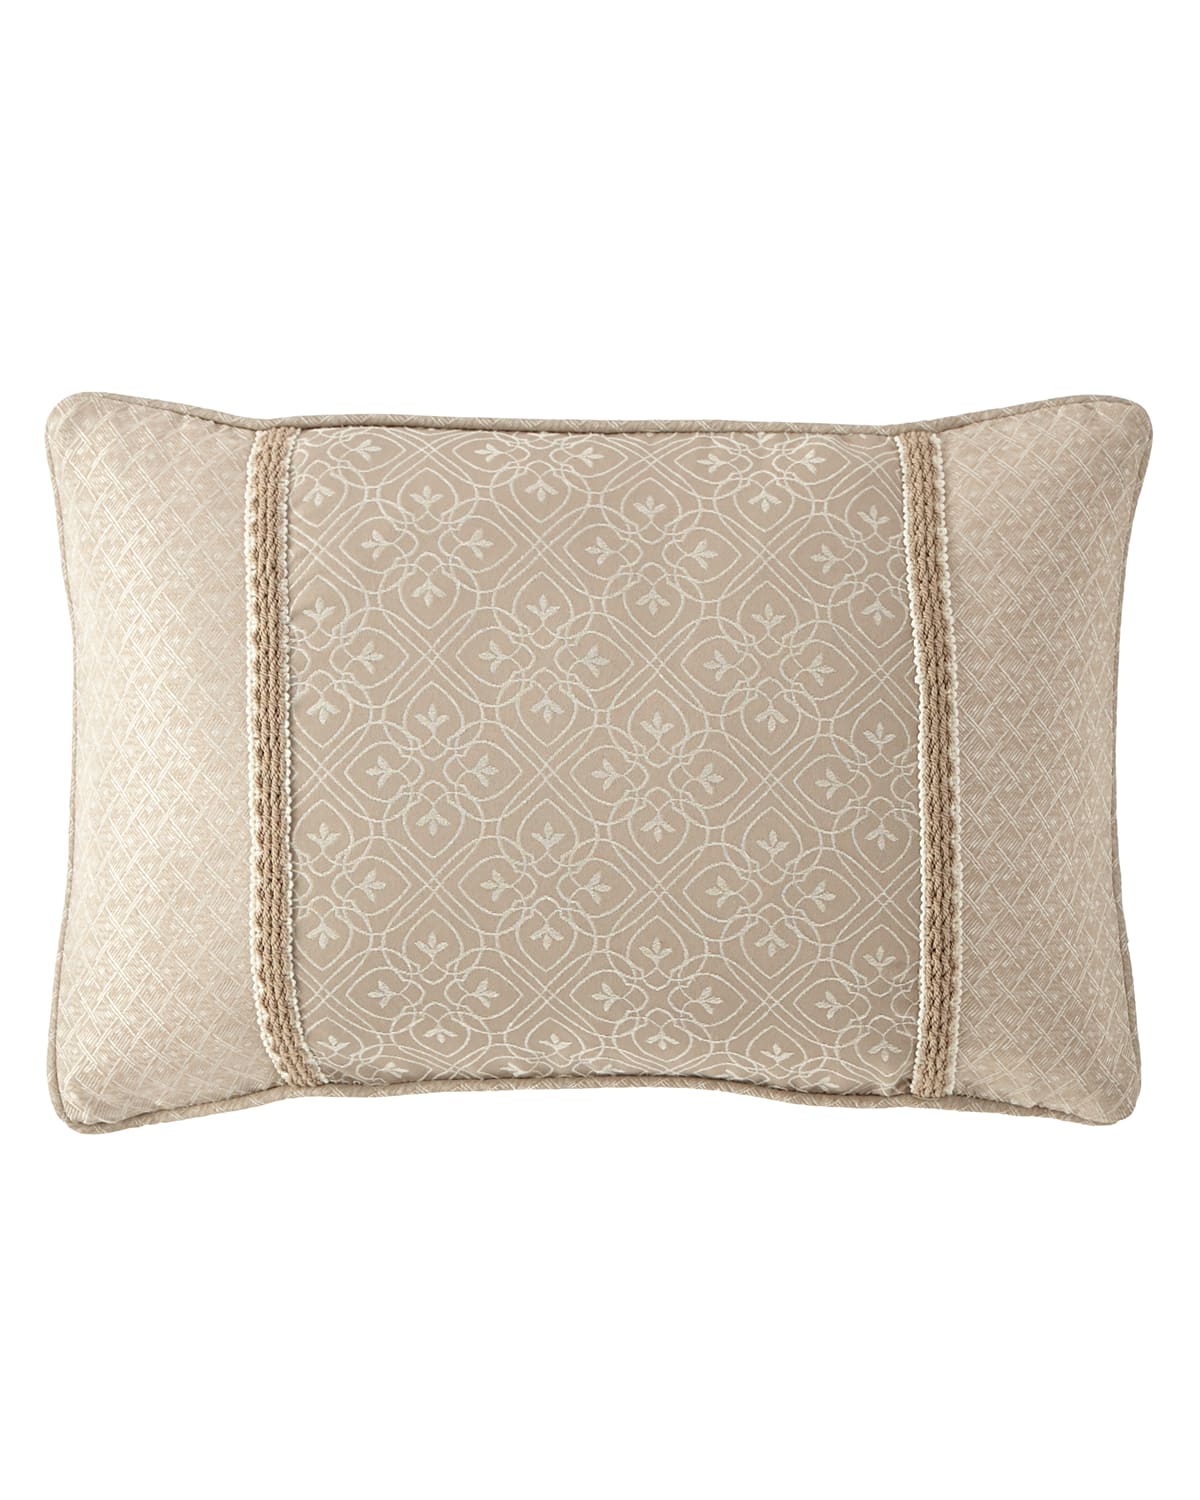 Image Waterford Victoria Orchid Decorative Pillow, 12" x 18"